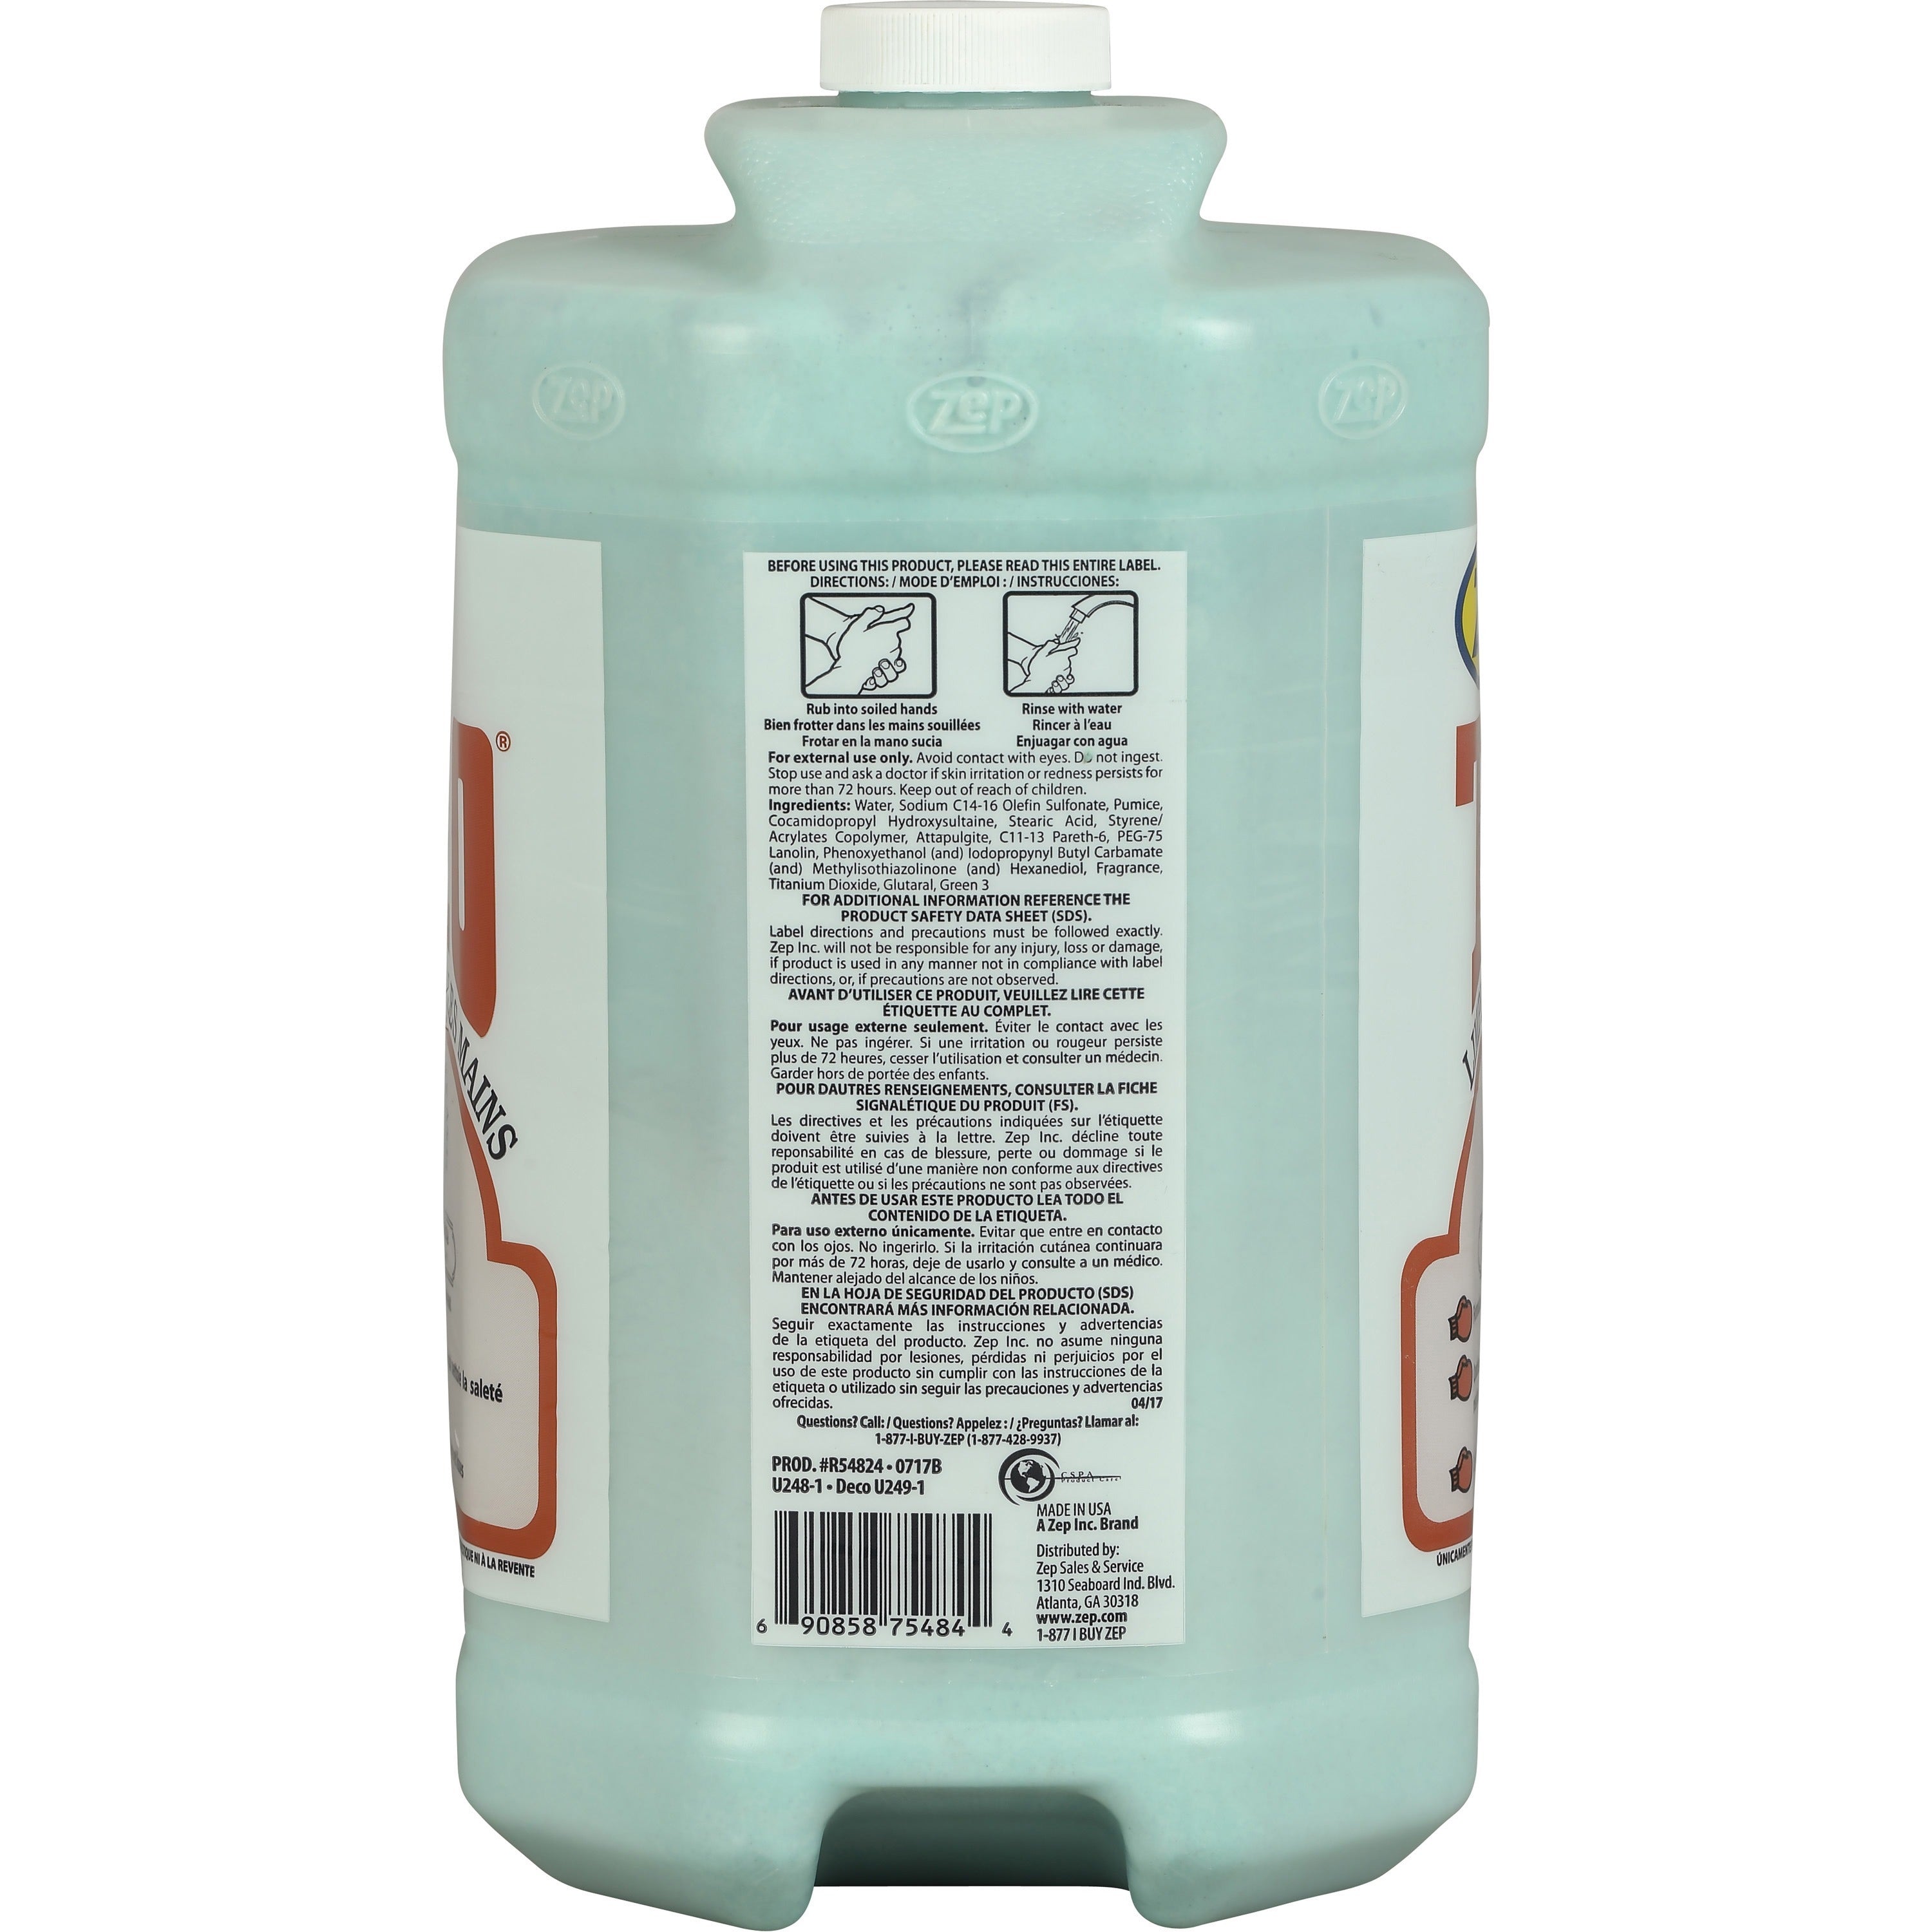 zep-tko-hand-cleaner-lemon-lime-scentfor-1-gal-38-l-dirt-remover-grime-remover-grease-remover-hand-blue-opaque-solvent-free-heavy-duty-non-flammable-4-carton_zper54824ct - 4